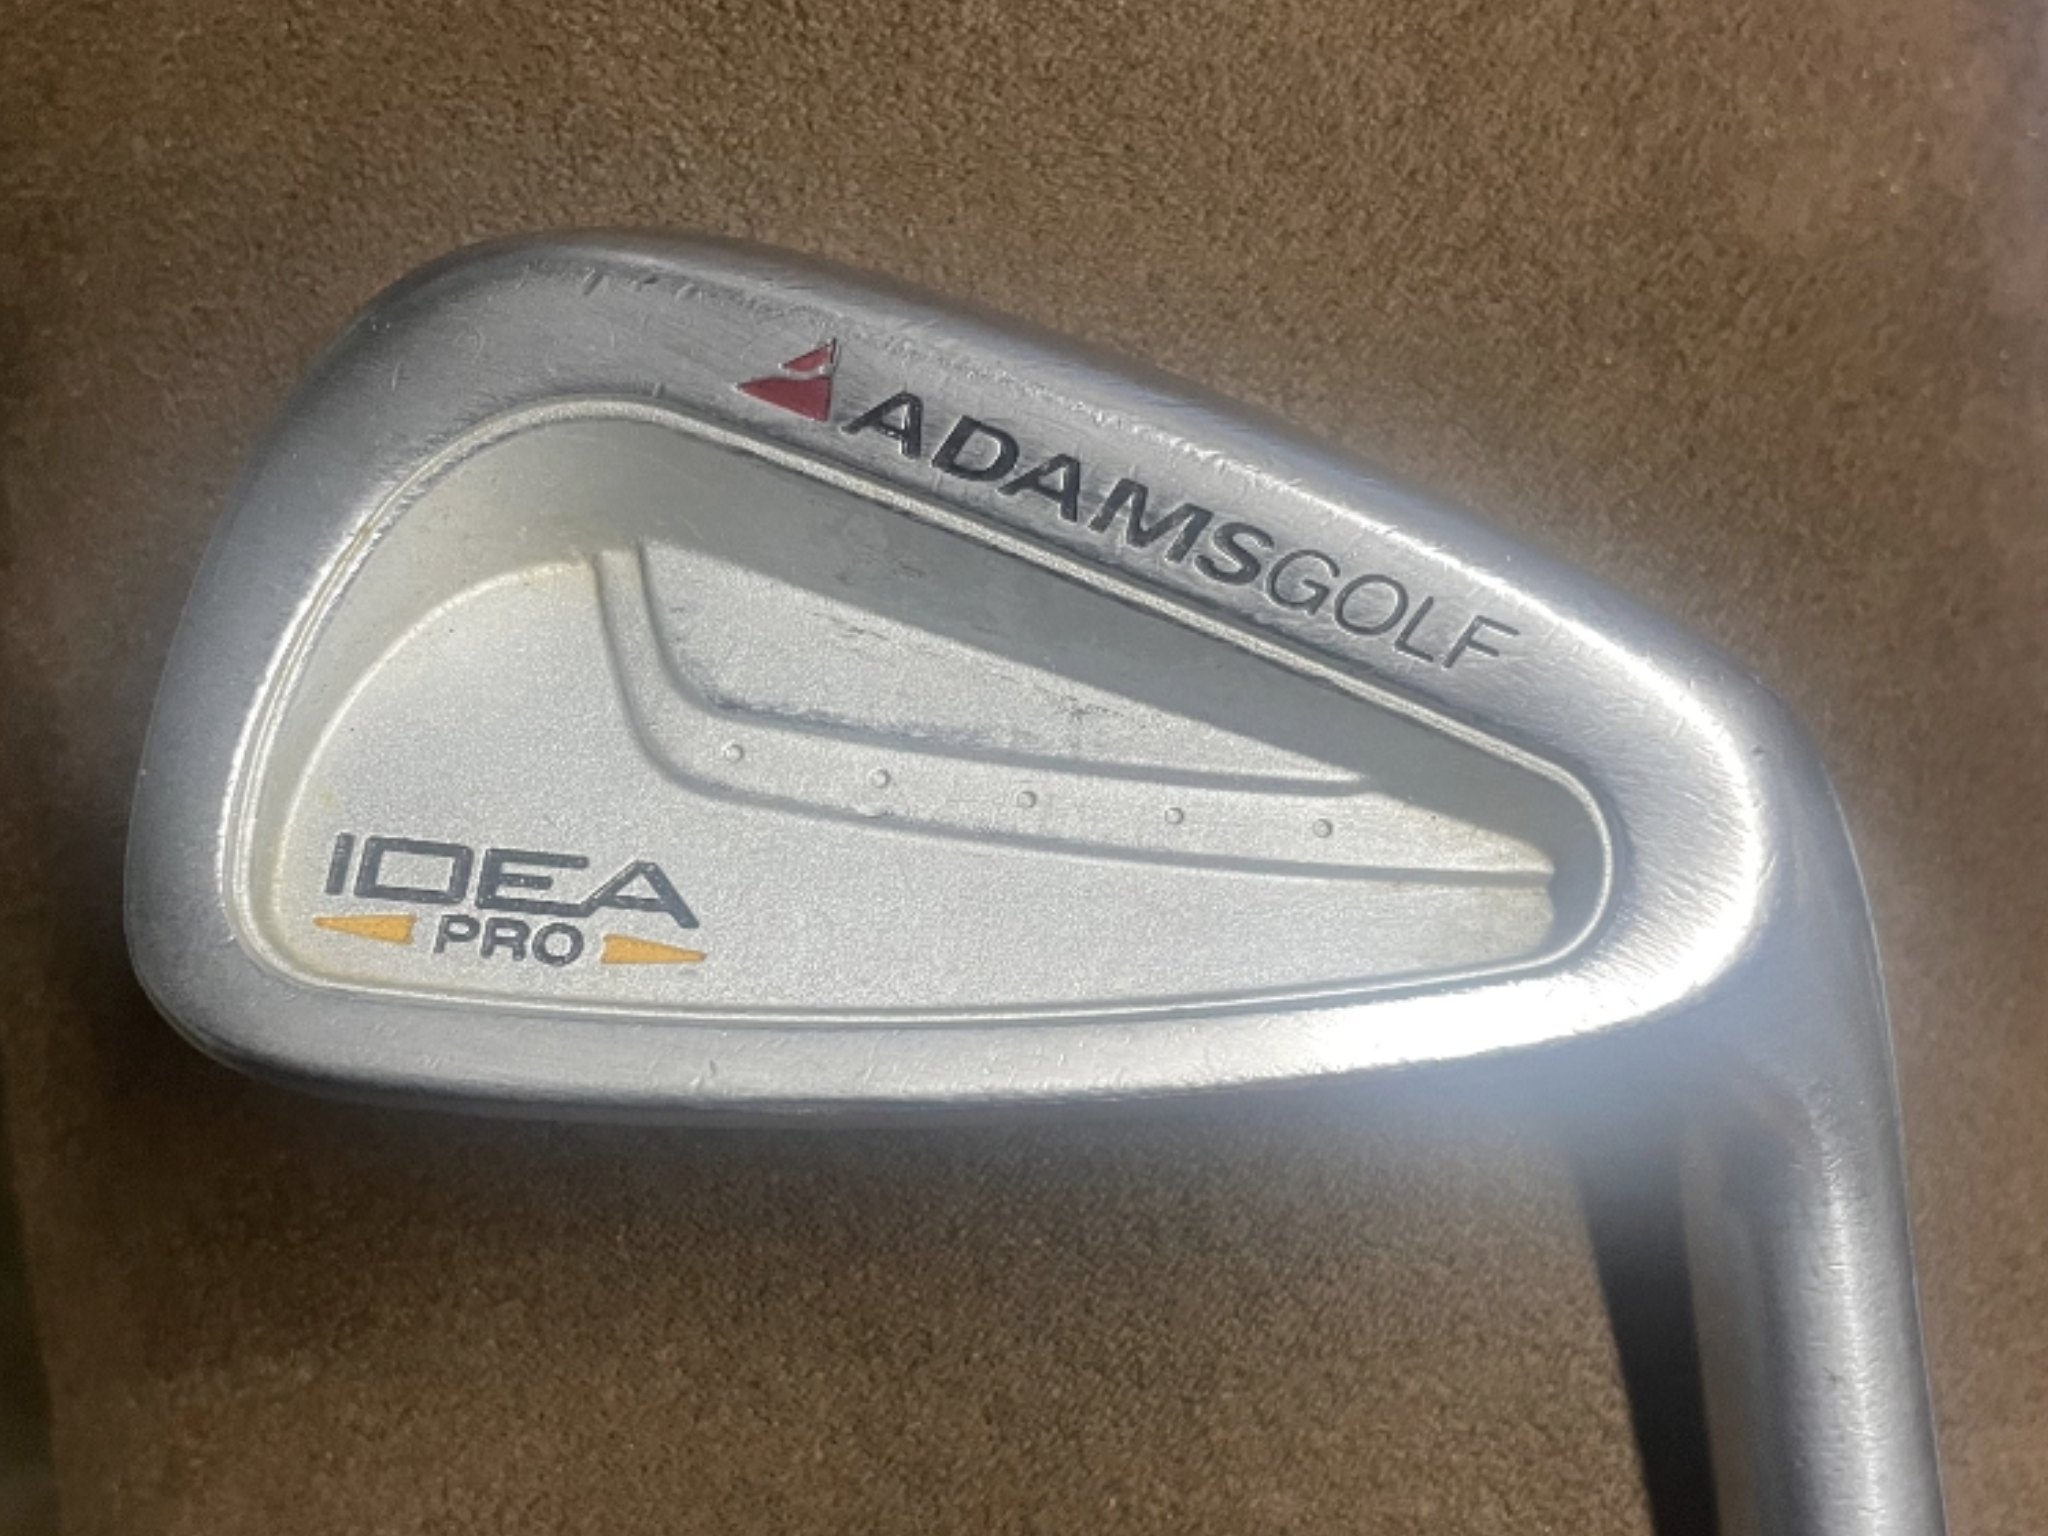 Starter irons with a $200 budget – GolfWRXers discuss – GolfWRX